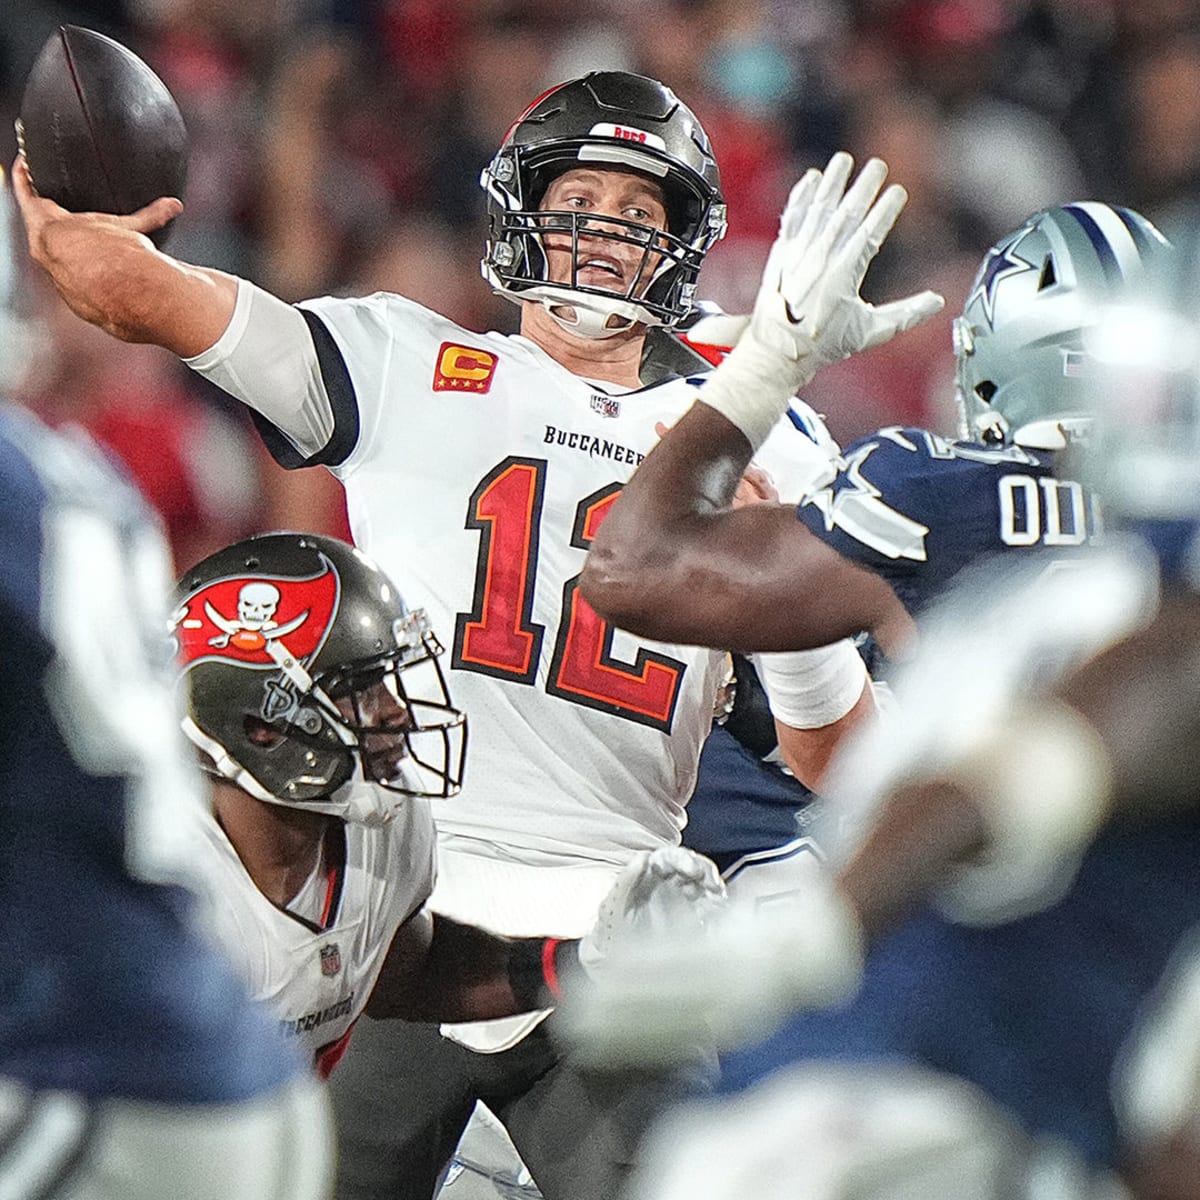 Buccaneers vs. Cowboys live stream: TV channel, how to watch